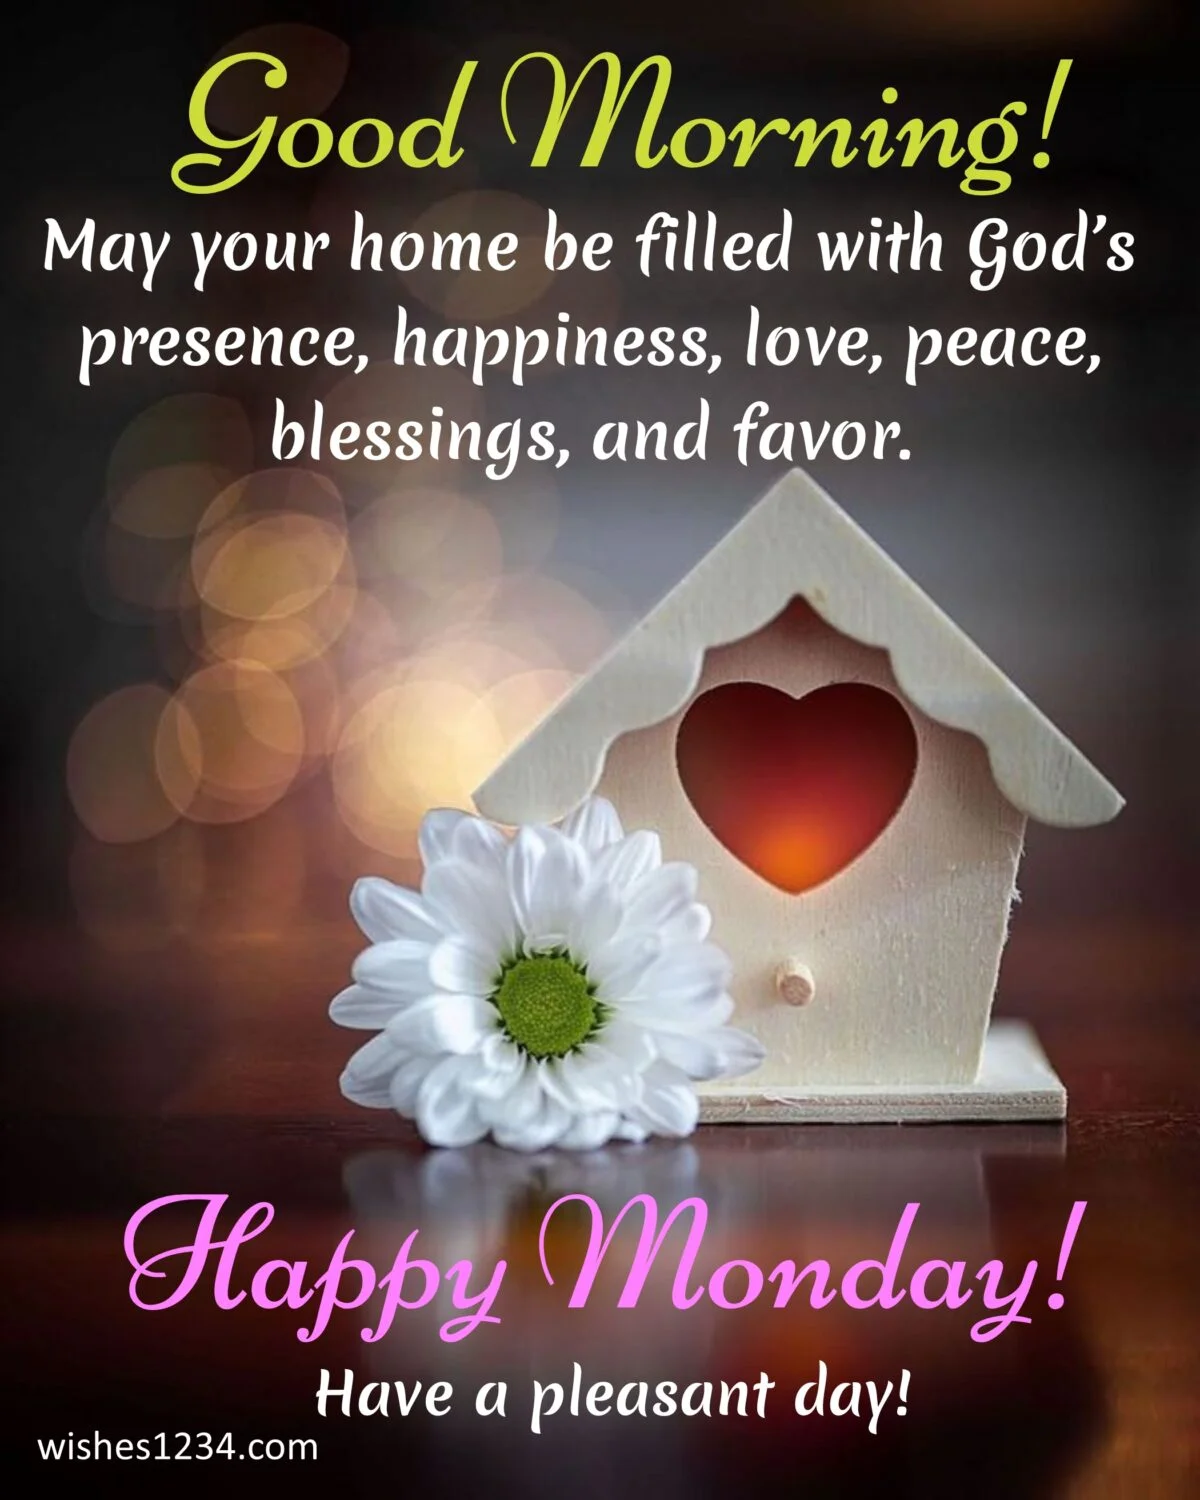 Toy house and flower, Monday Quotes | Monday Motivation.